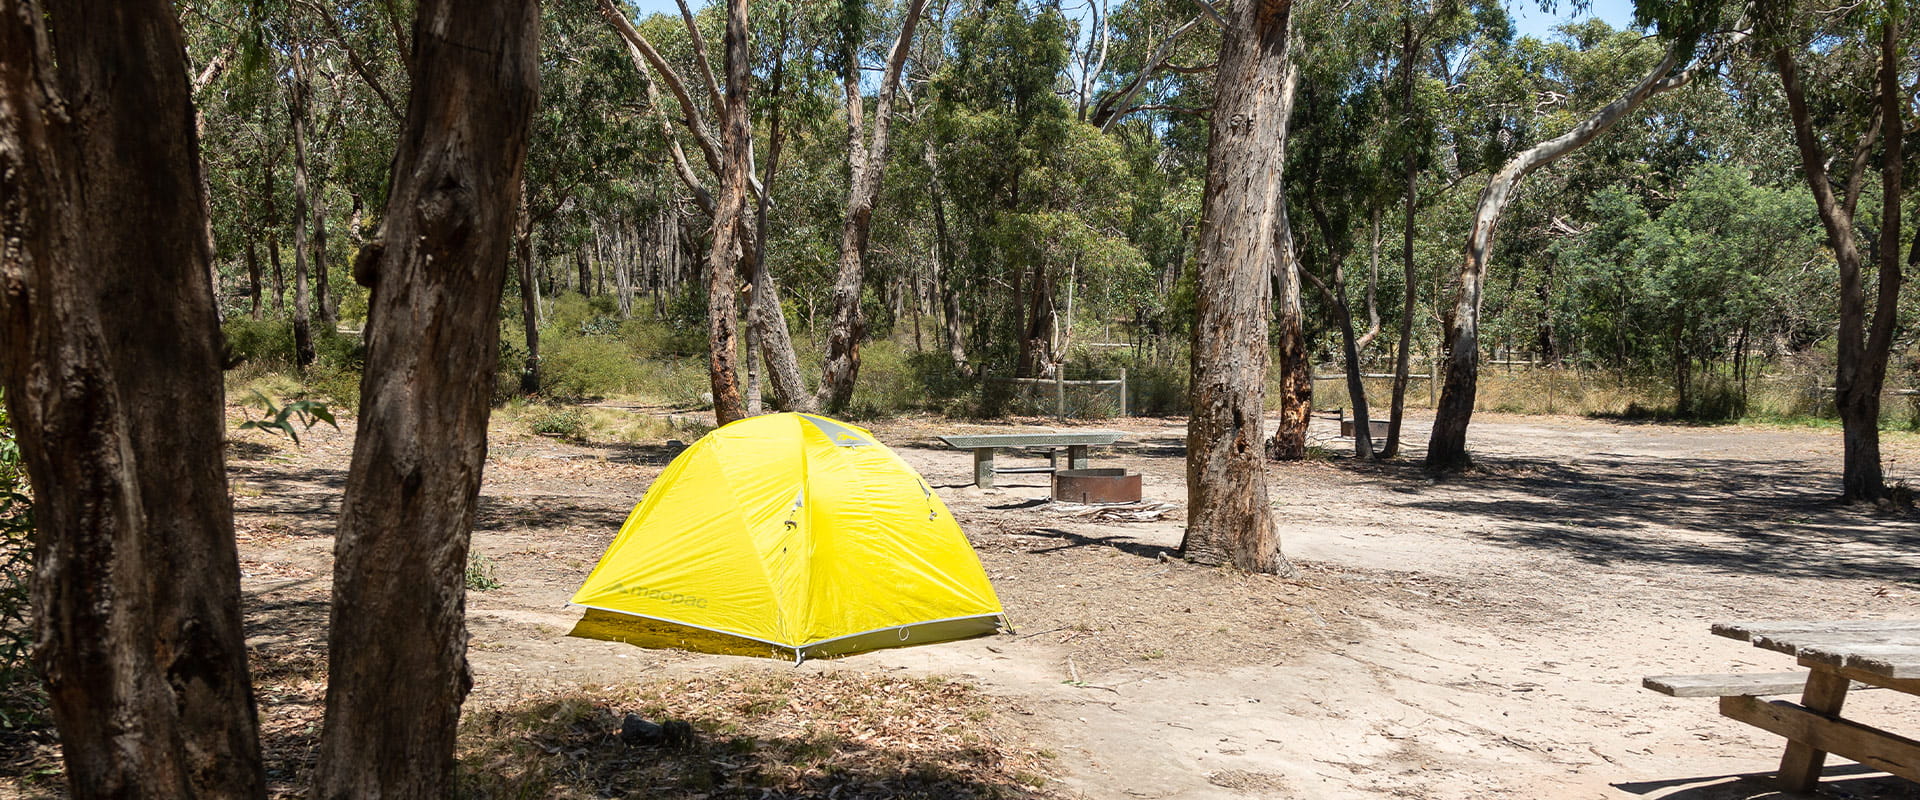 A yellow tent infront of a fire pit and bench against a background of dry forest.